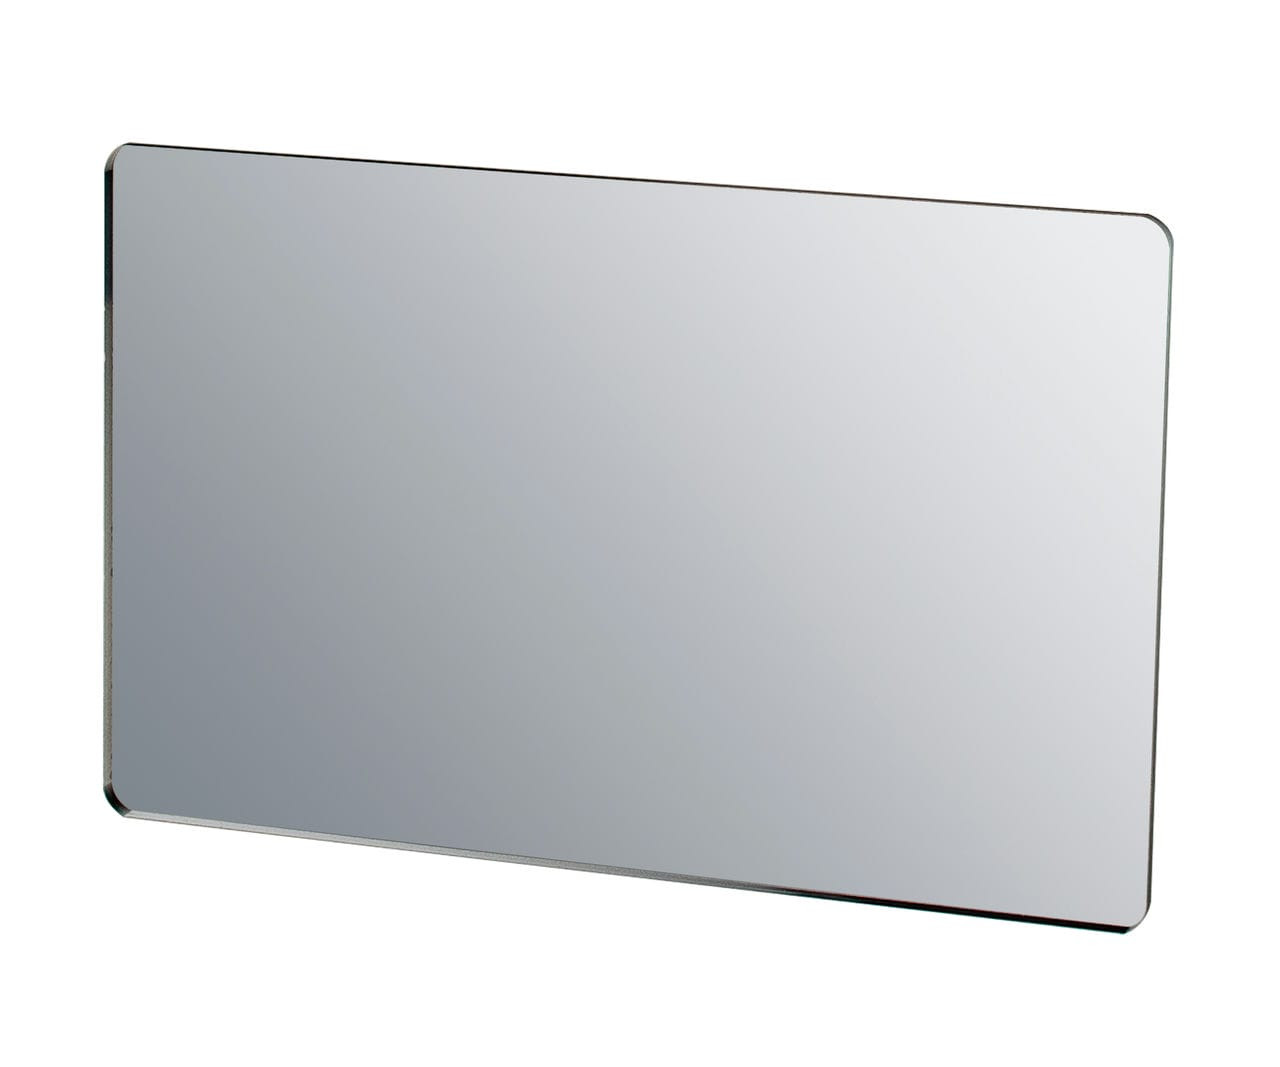 Metal Mount 4 x 6 Acrylic Mirror Sheet with Magnets